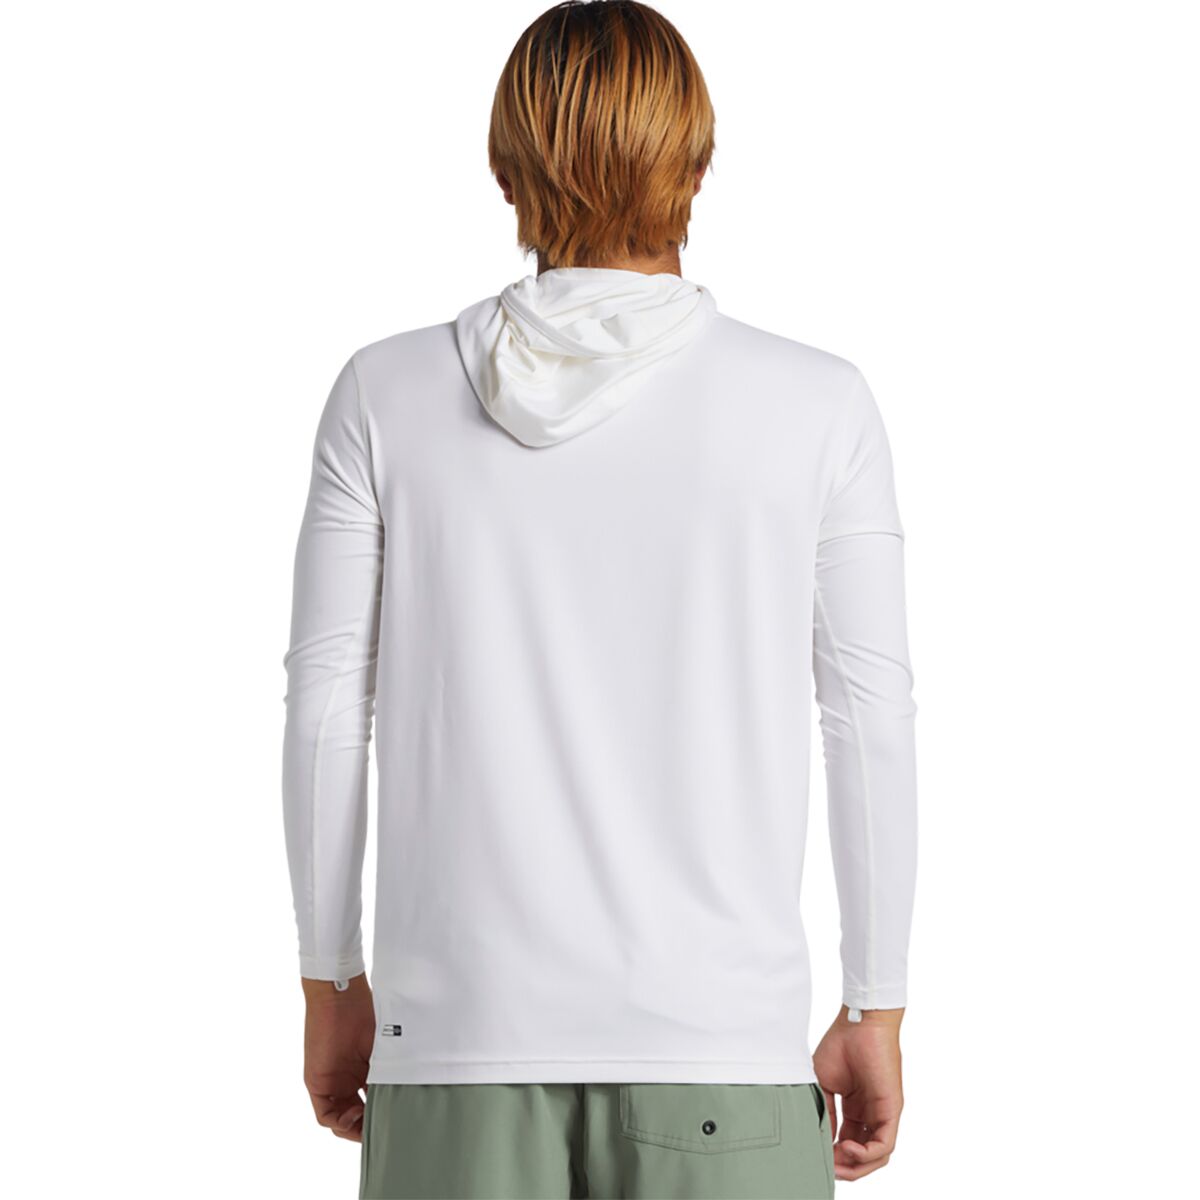 Quiksilver Everyday Hooded Surf T-Shirt - Men's White, XL